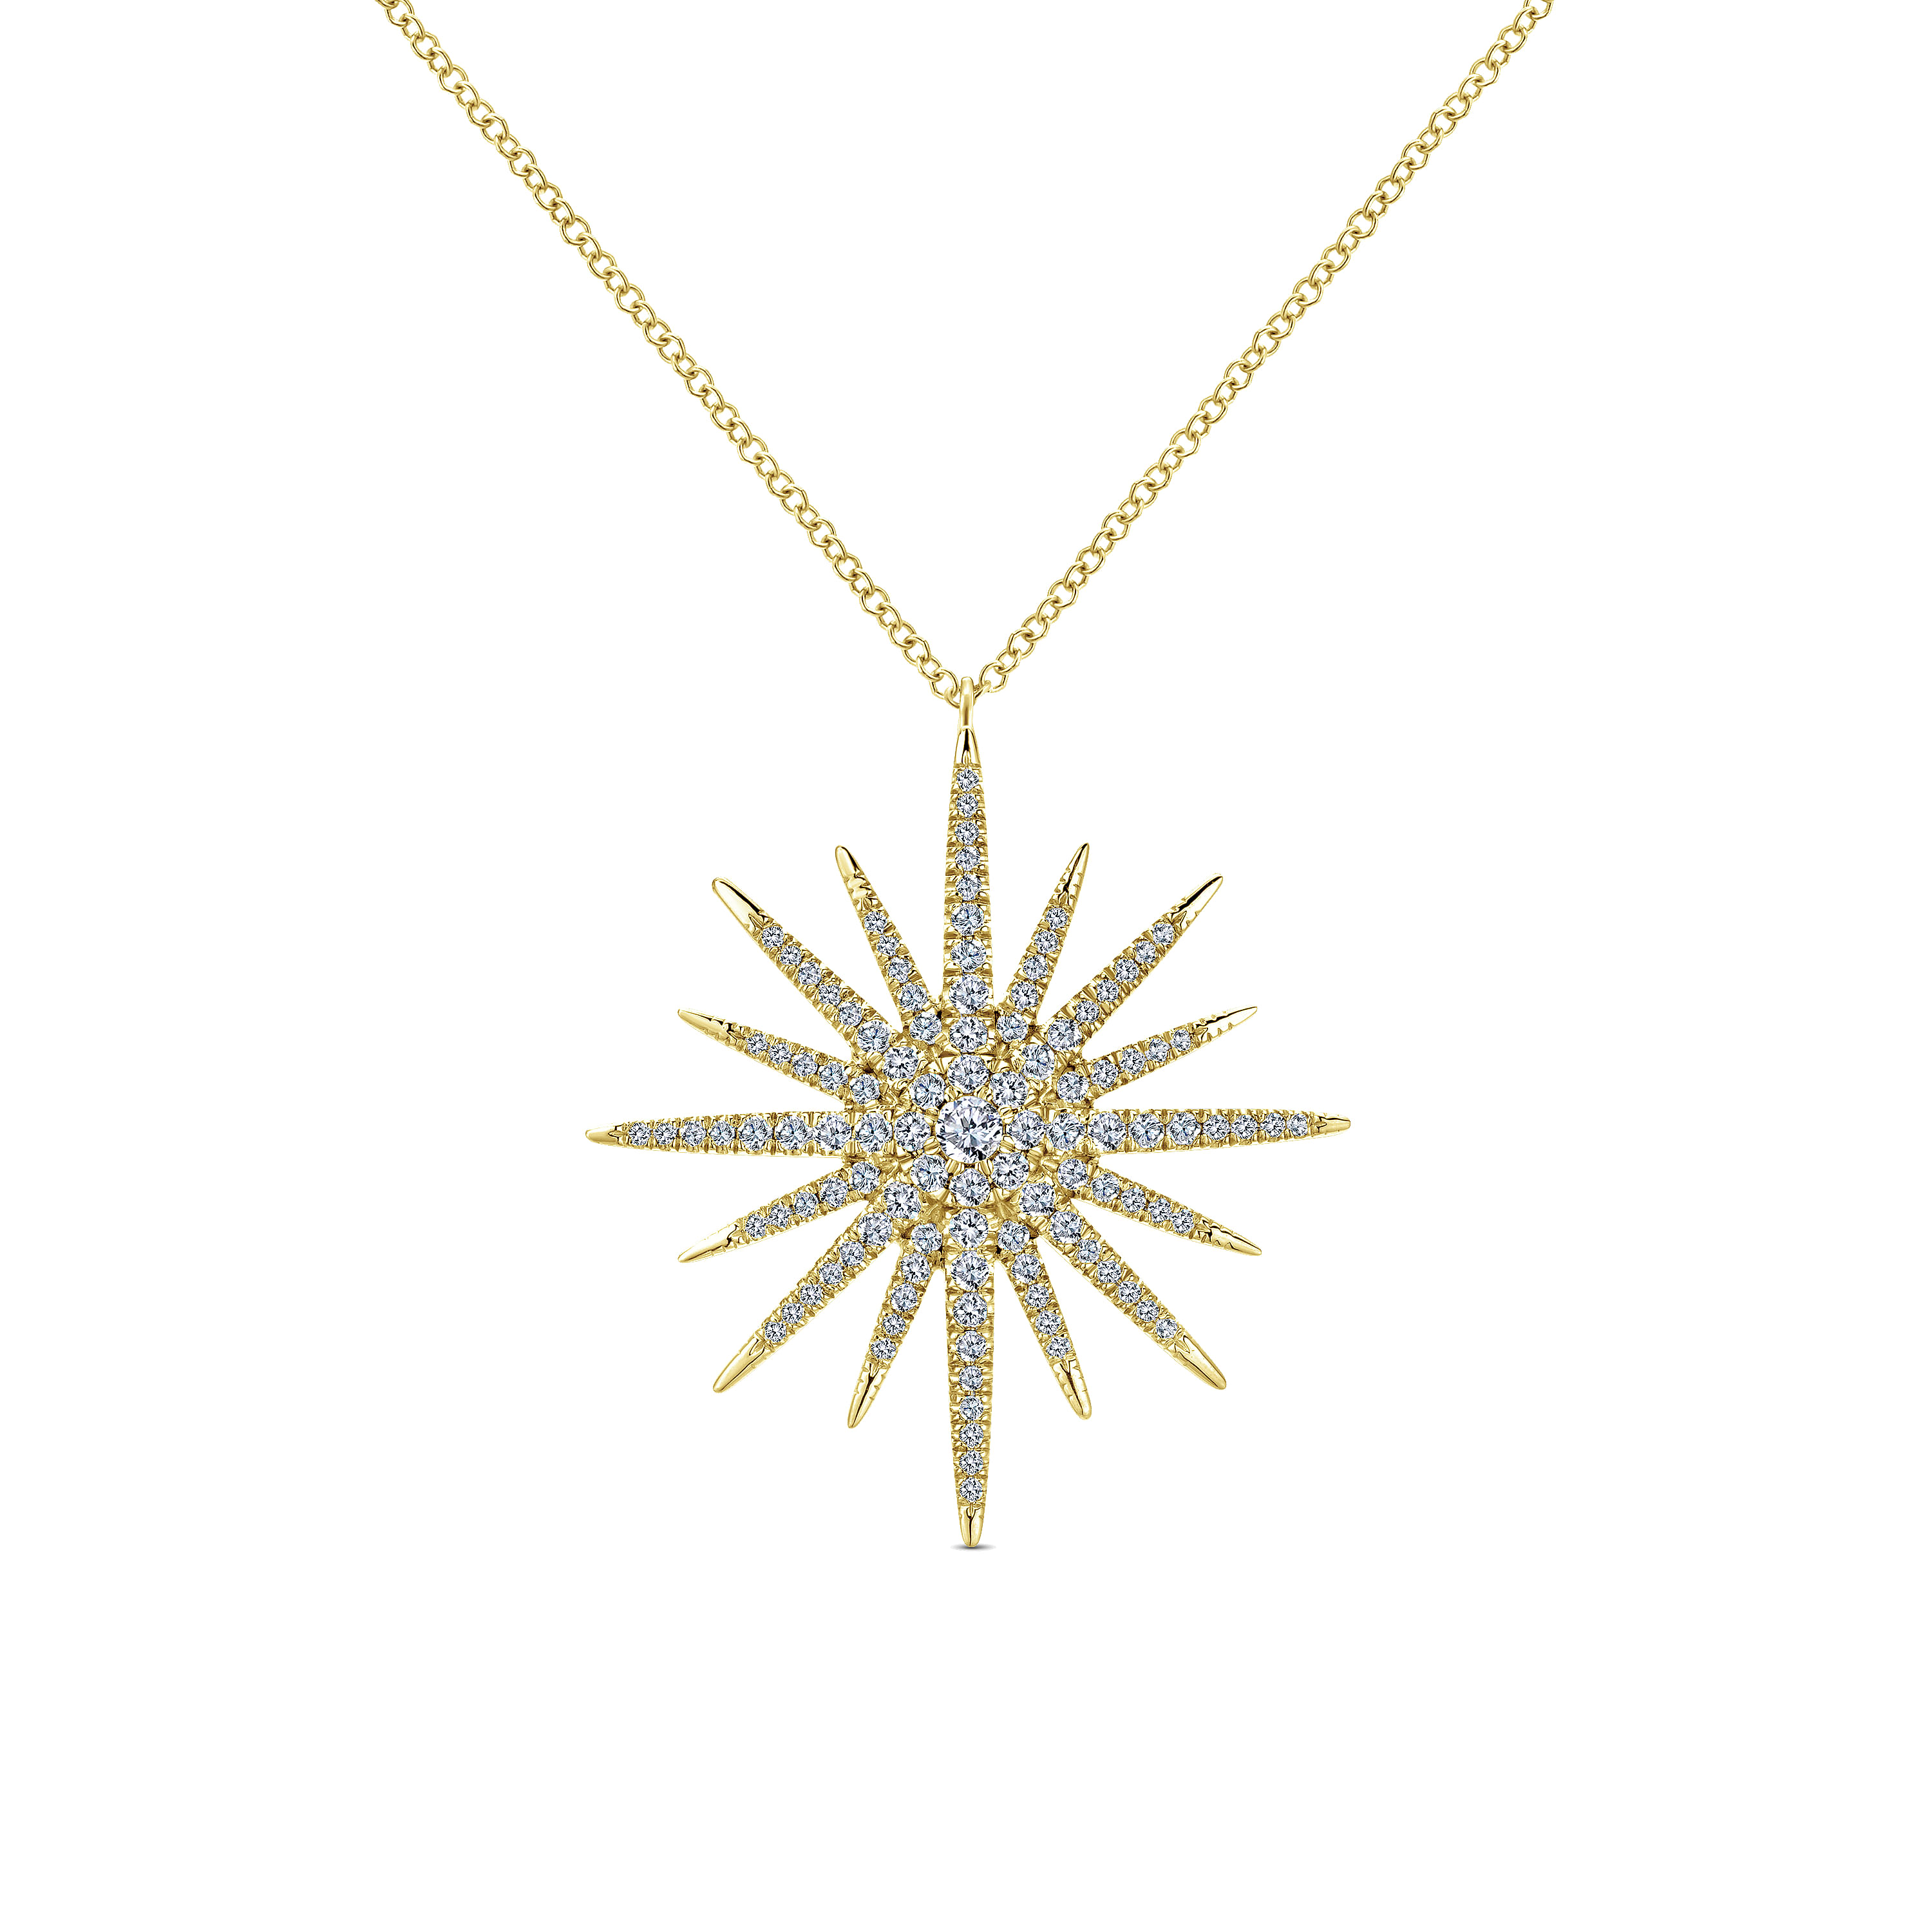 25 Inch 14K Yellow Gold Starburst Pendant Necklace